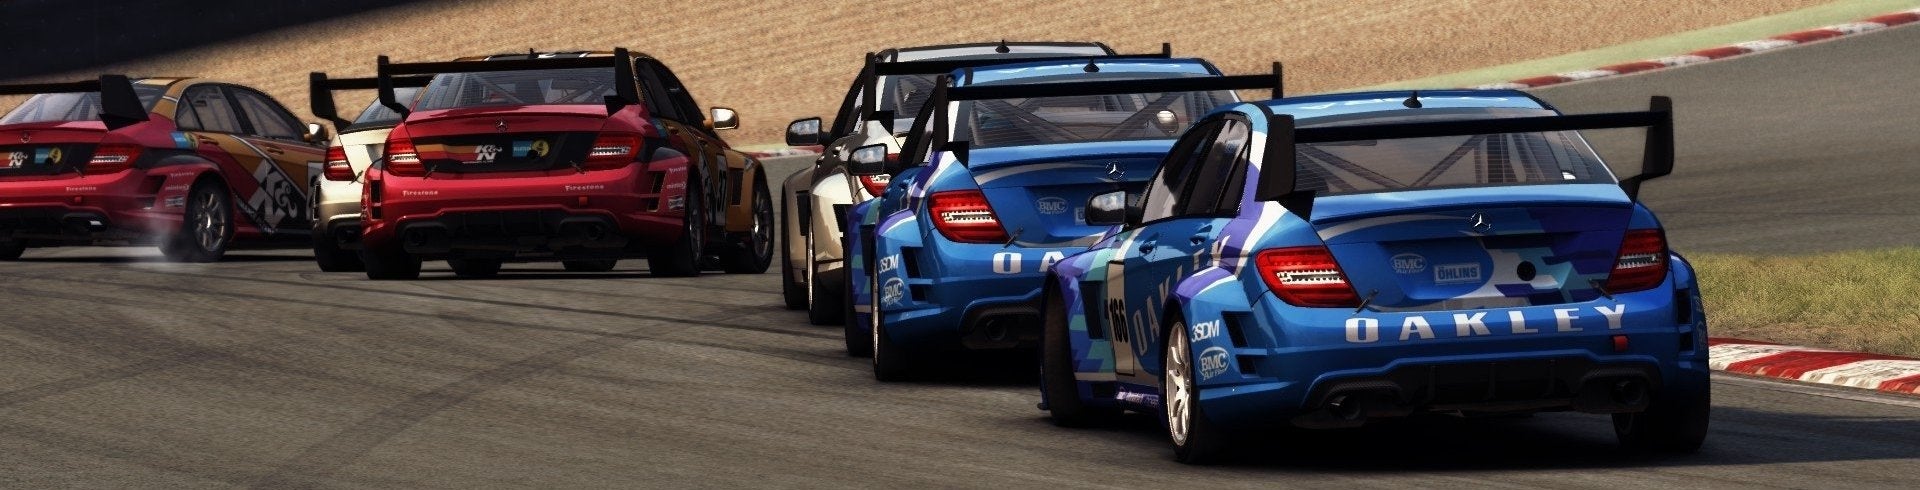 Image for Grid Autosport review